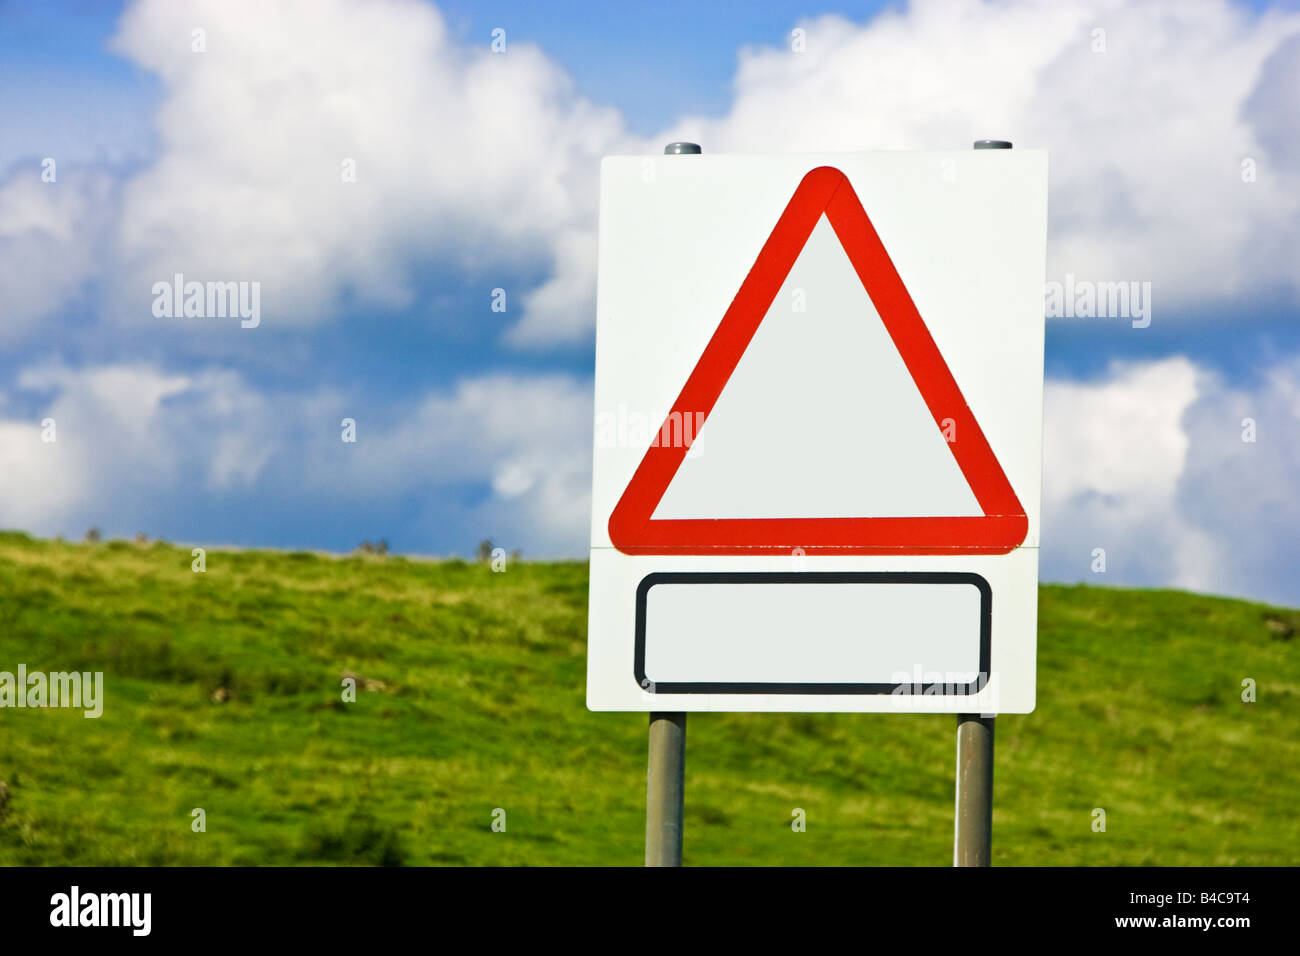 Blank red triangle road warning sign England UK Stock Photo